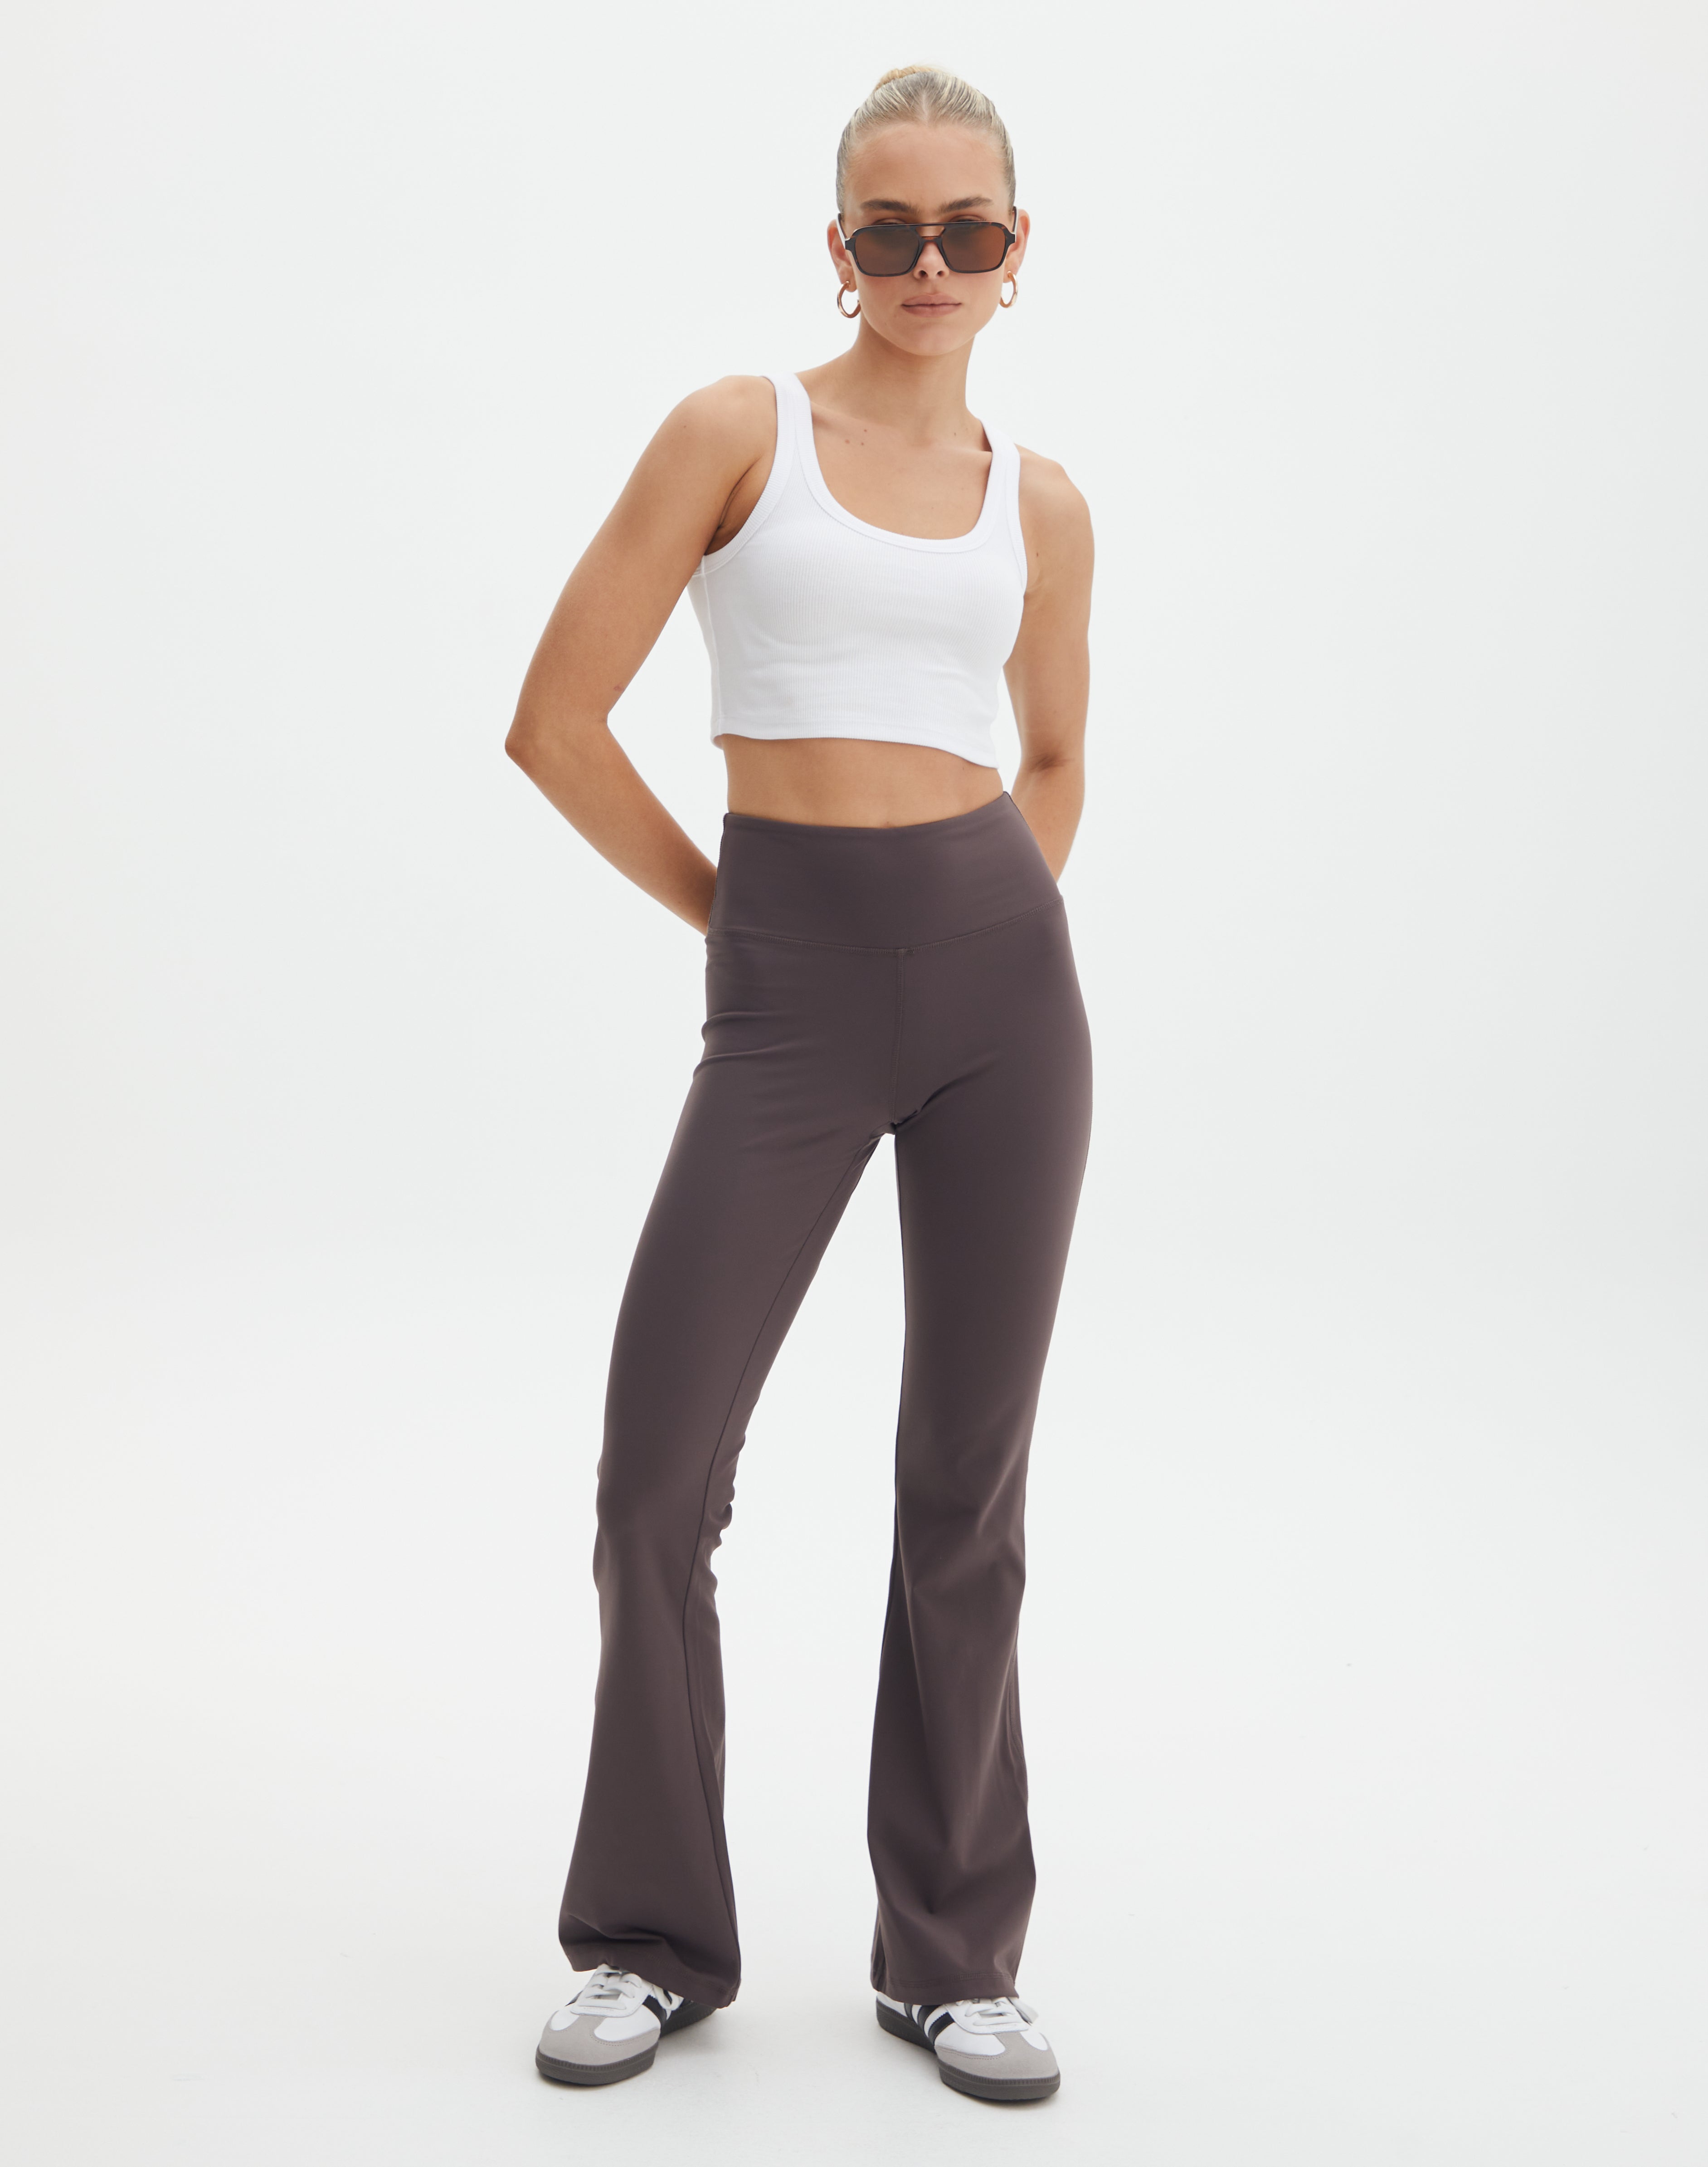 The Return of the Flared Leggings Trend From the '90s | POPSUGAR Fashion